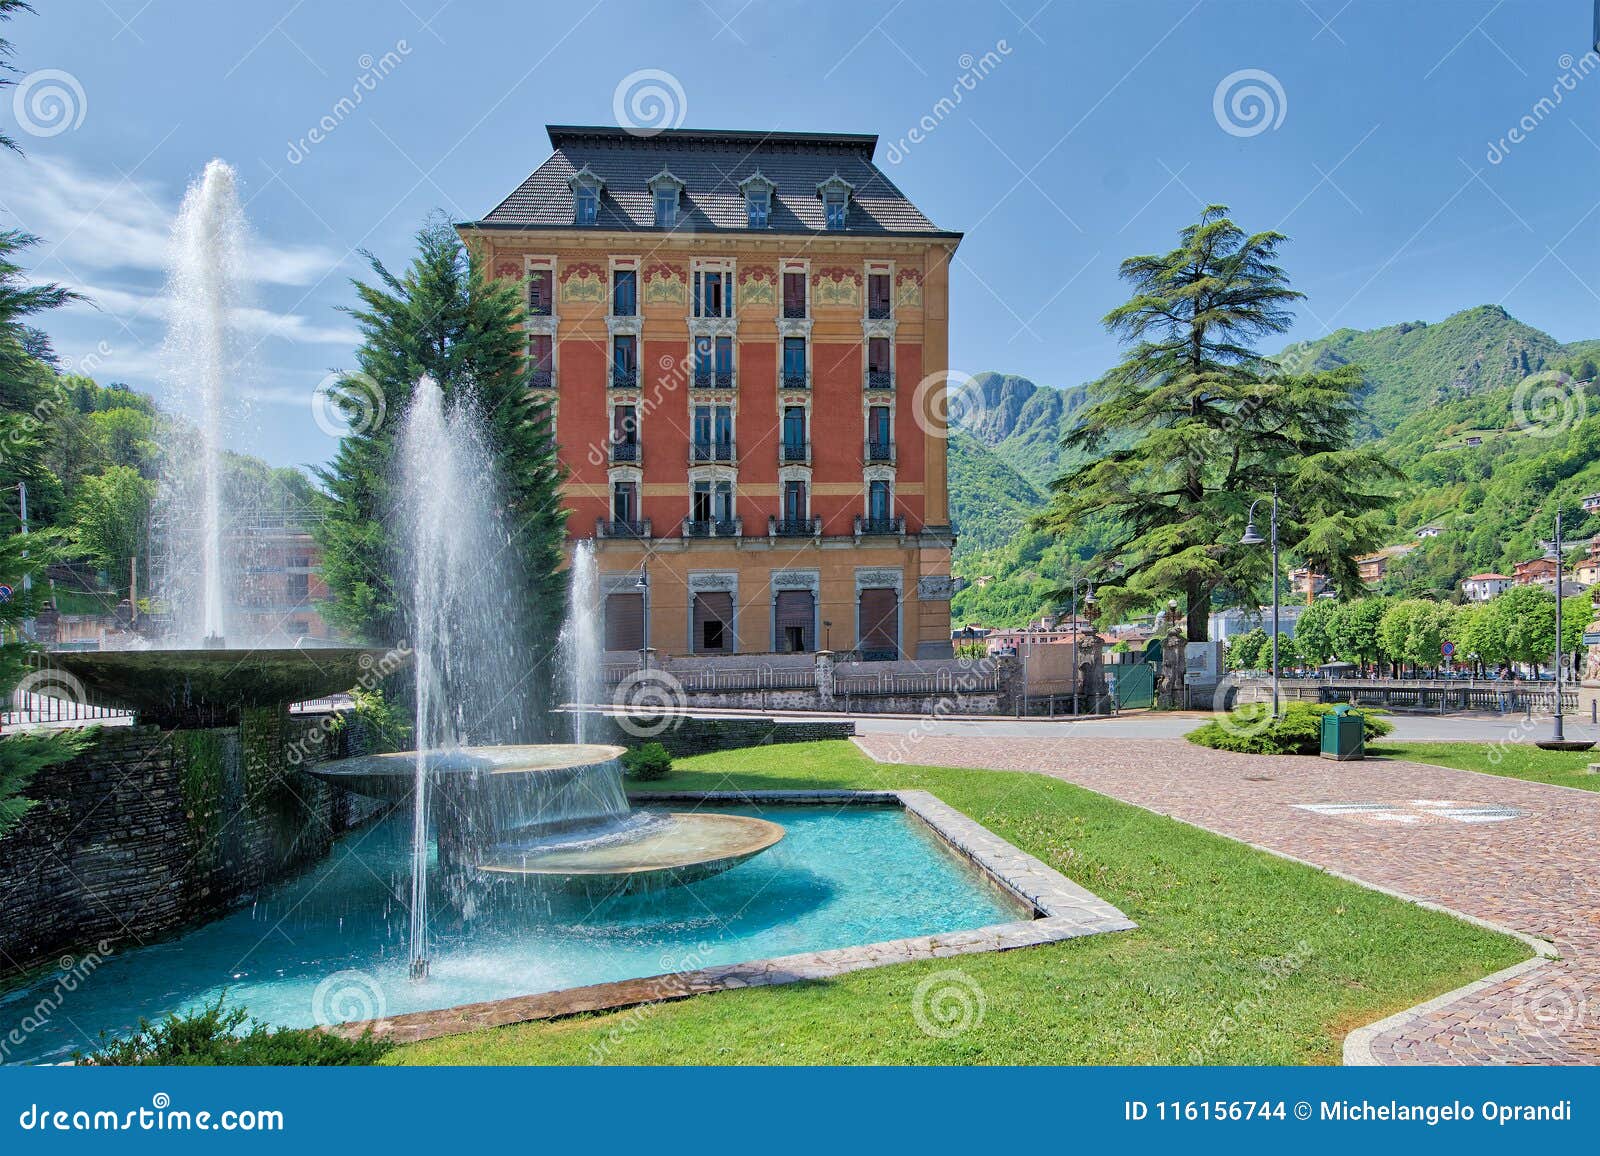 fountains in san pellegrino terme with the grand hotel